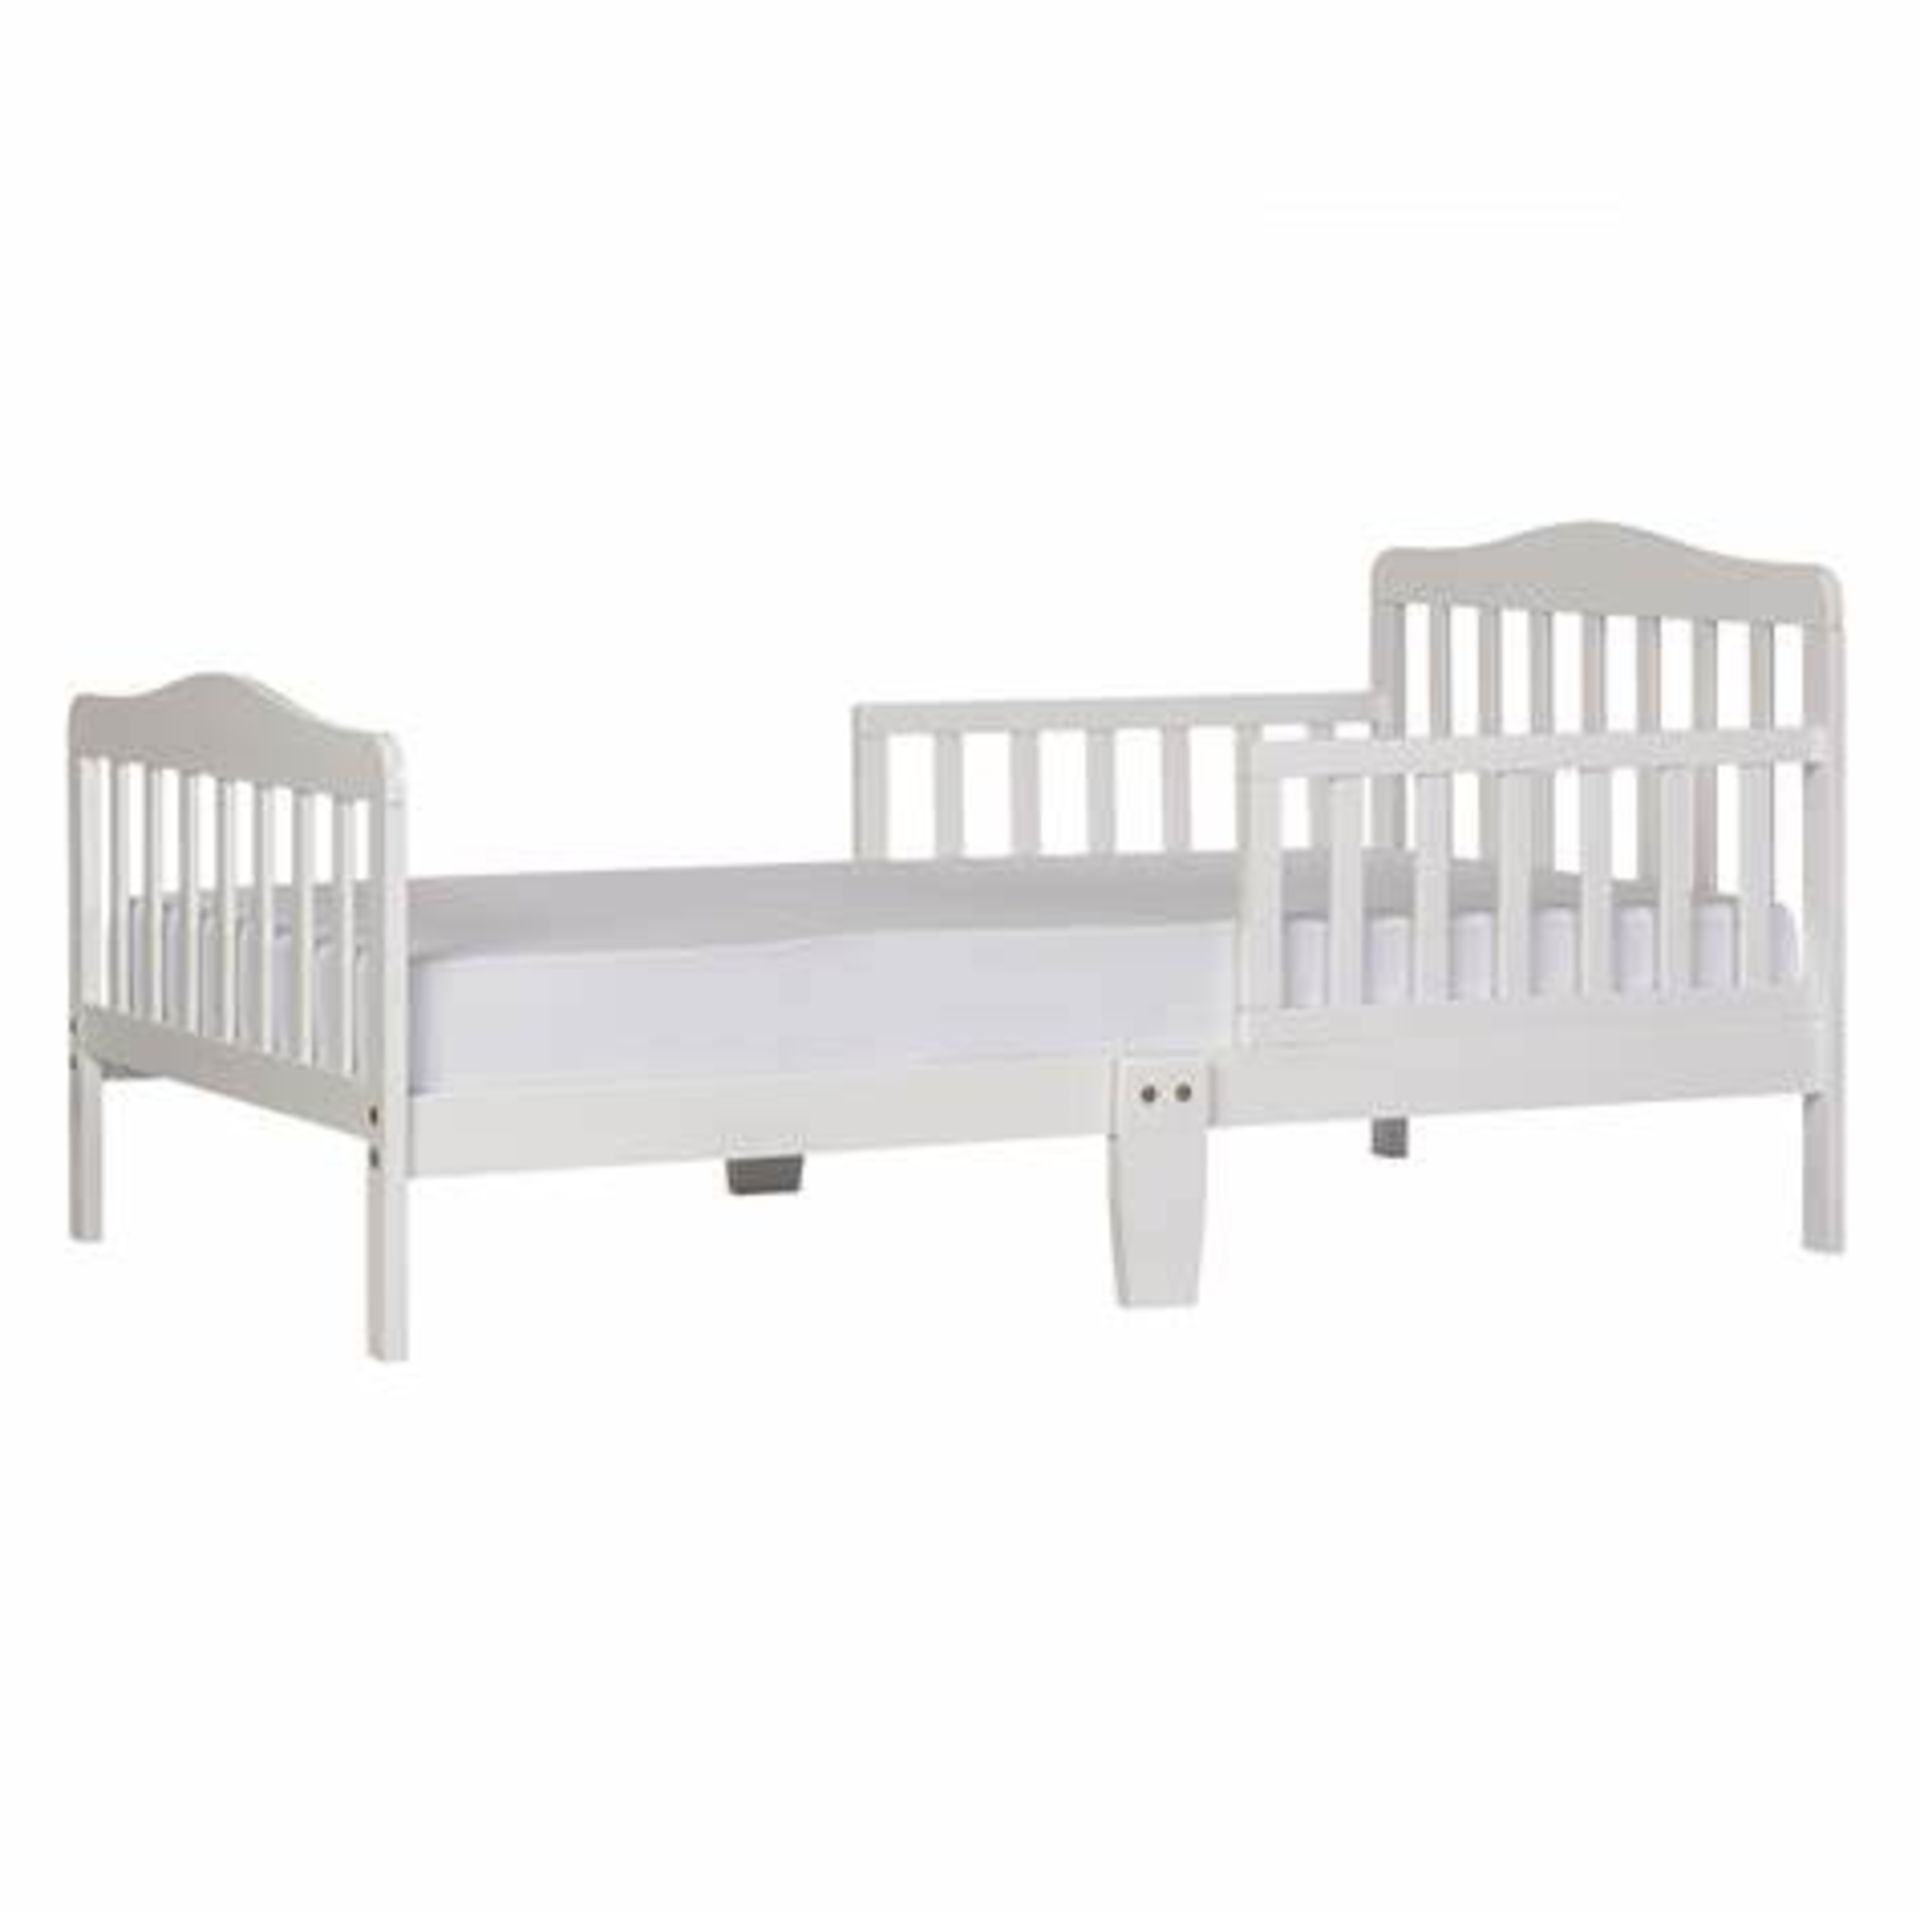 10 X Brand New Dream on Me Classic Toddler BedS. Product dimensionS - 144.8L x 71.1W x 76.2H CM - Image 3 of 5